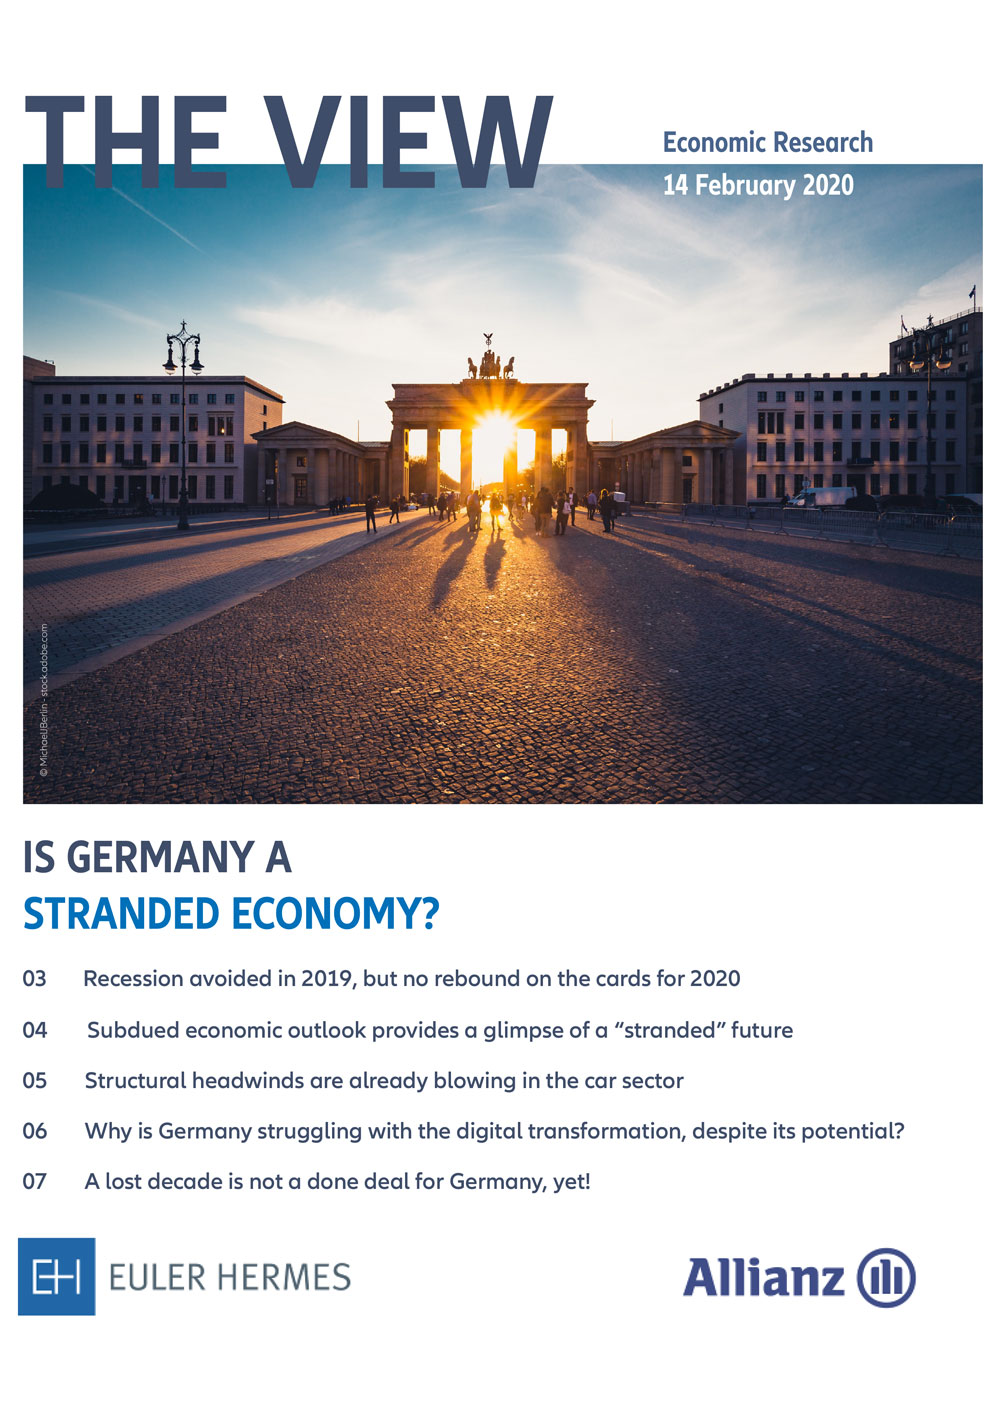 Is Germany a “stranded” economy?